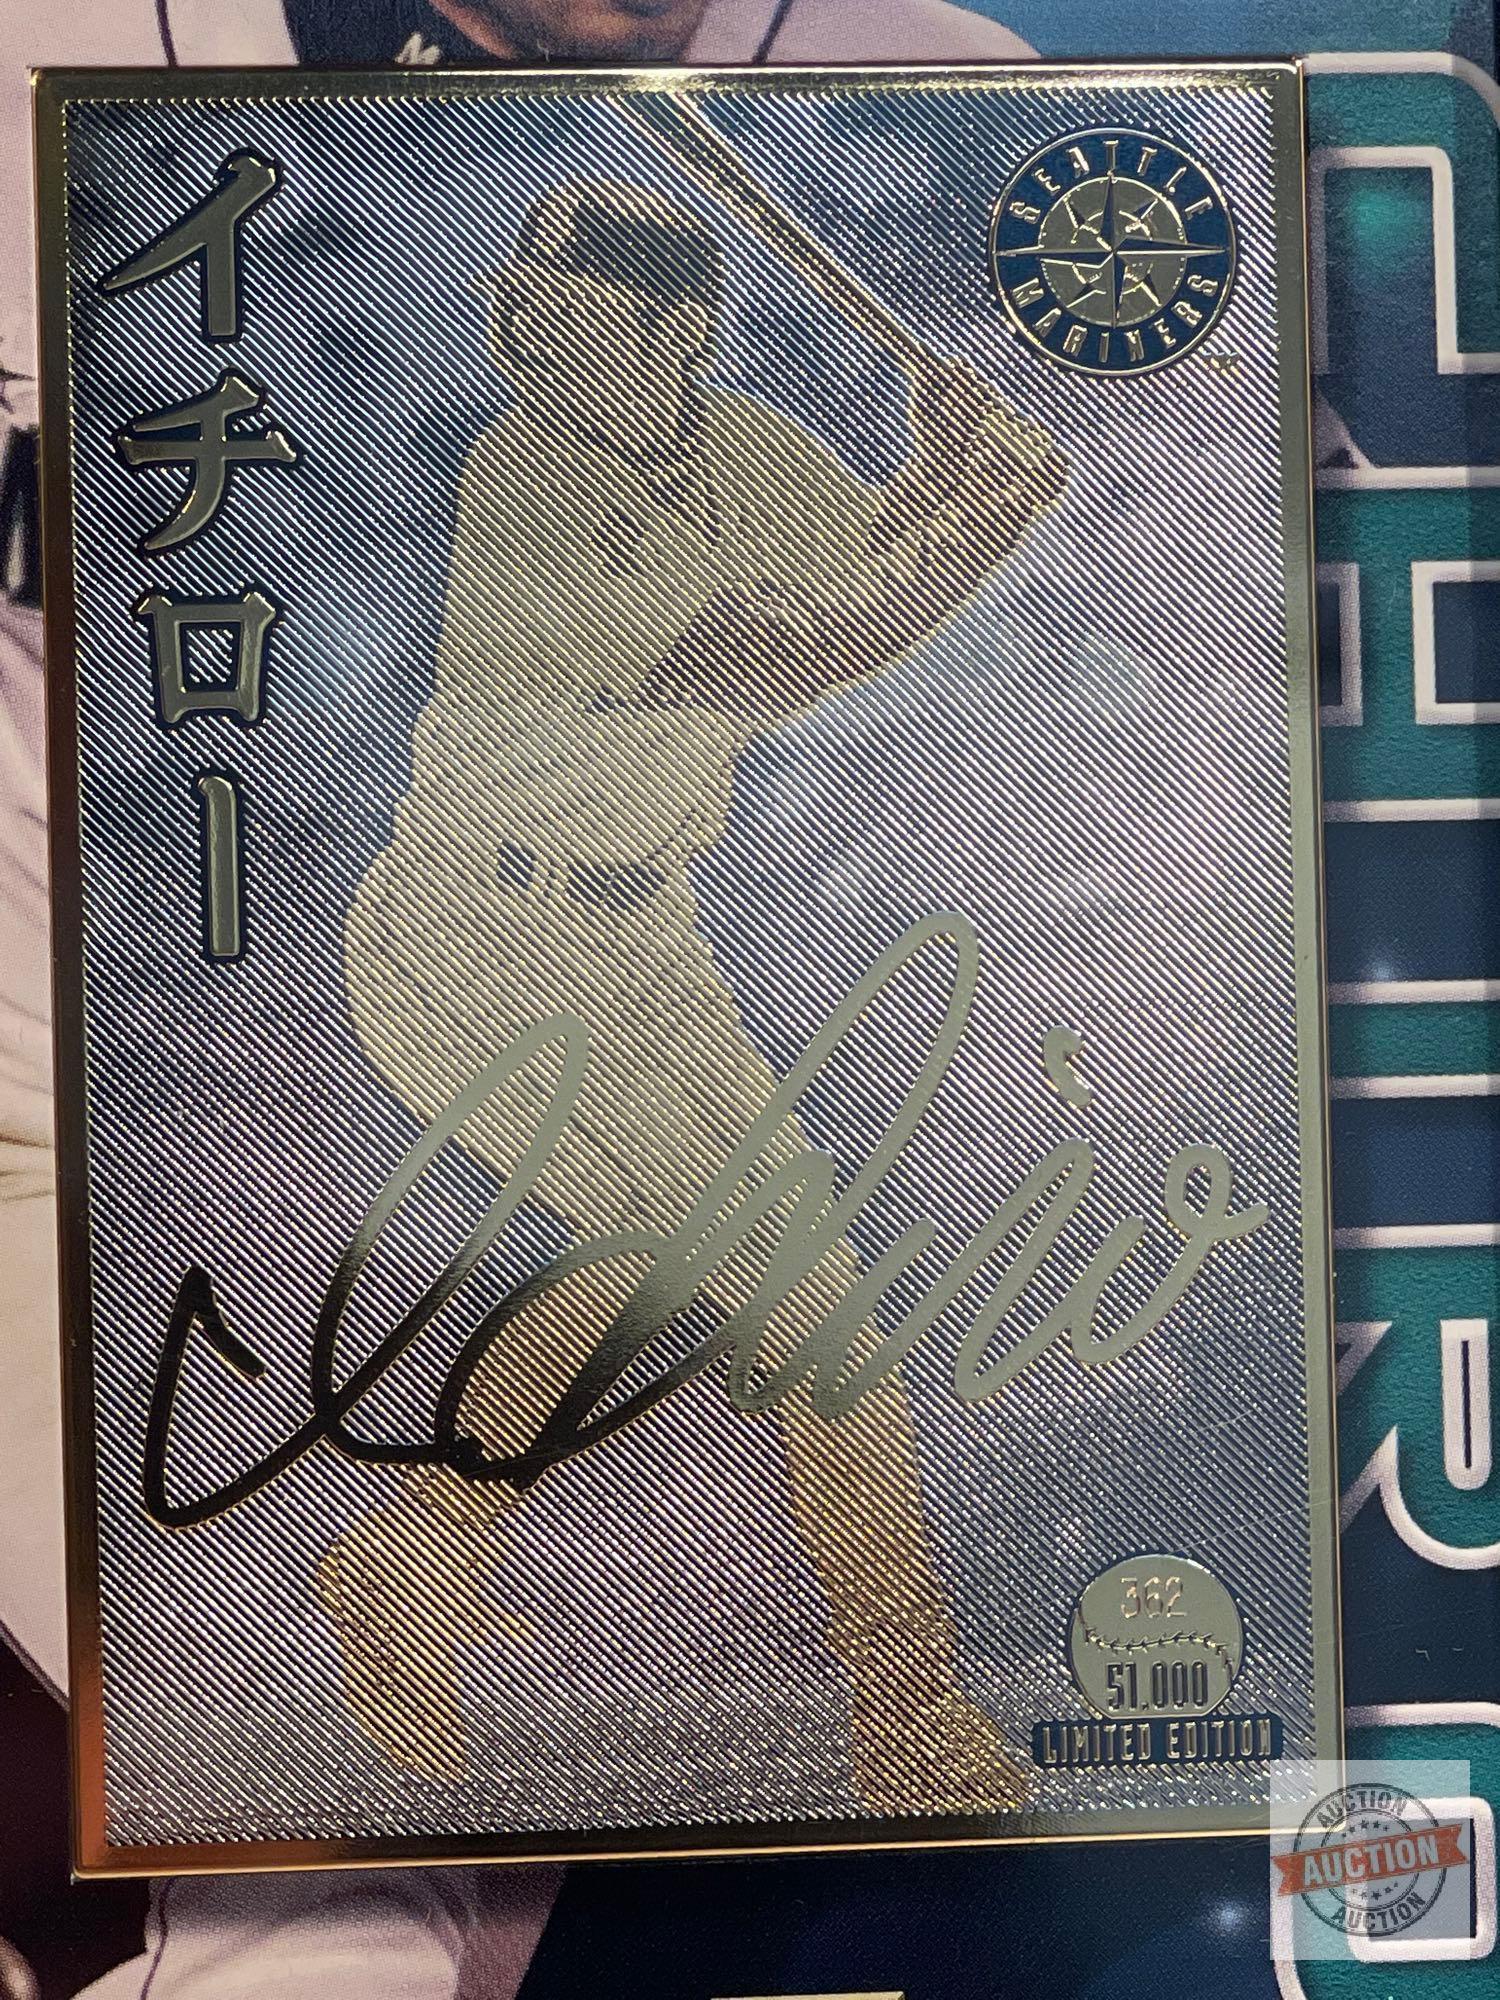 2001 All-Star Ichiro American League All-Star, Limited-Edition gold foil signature card